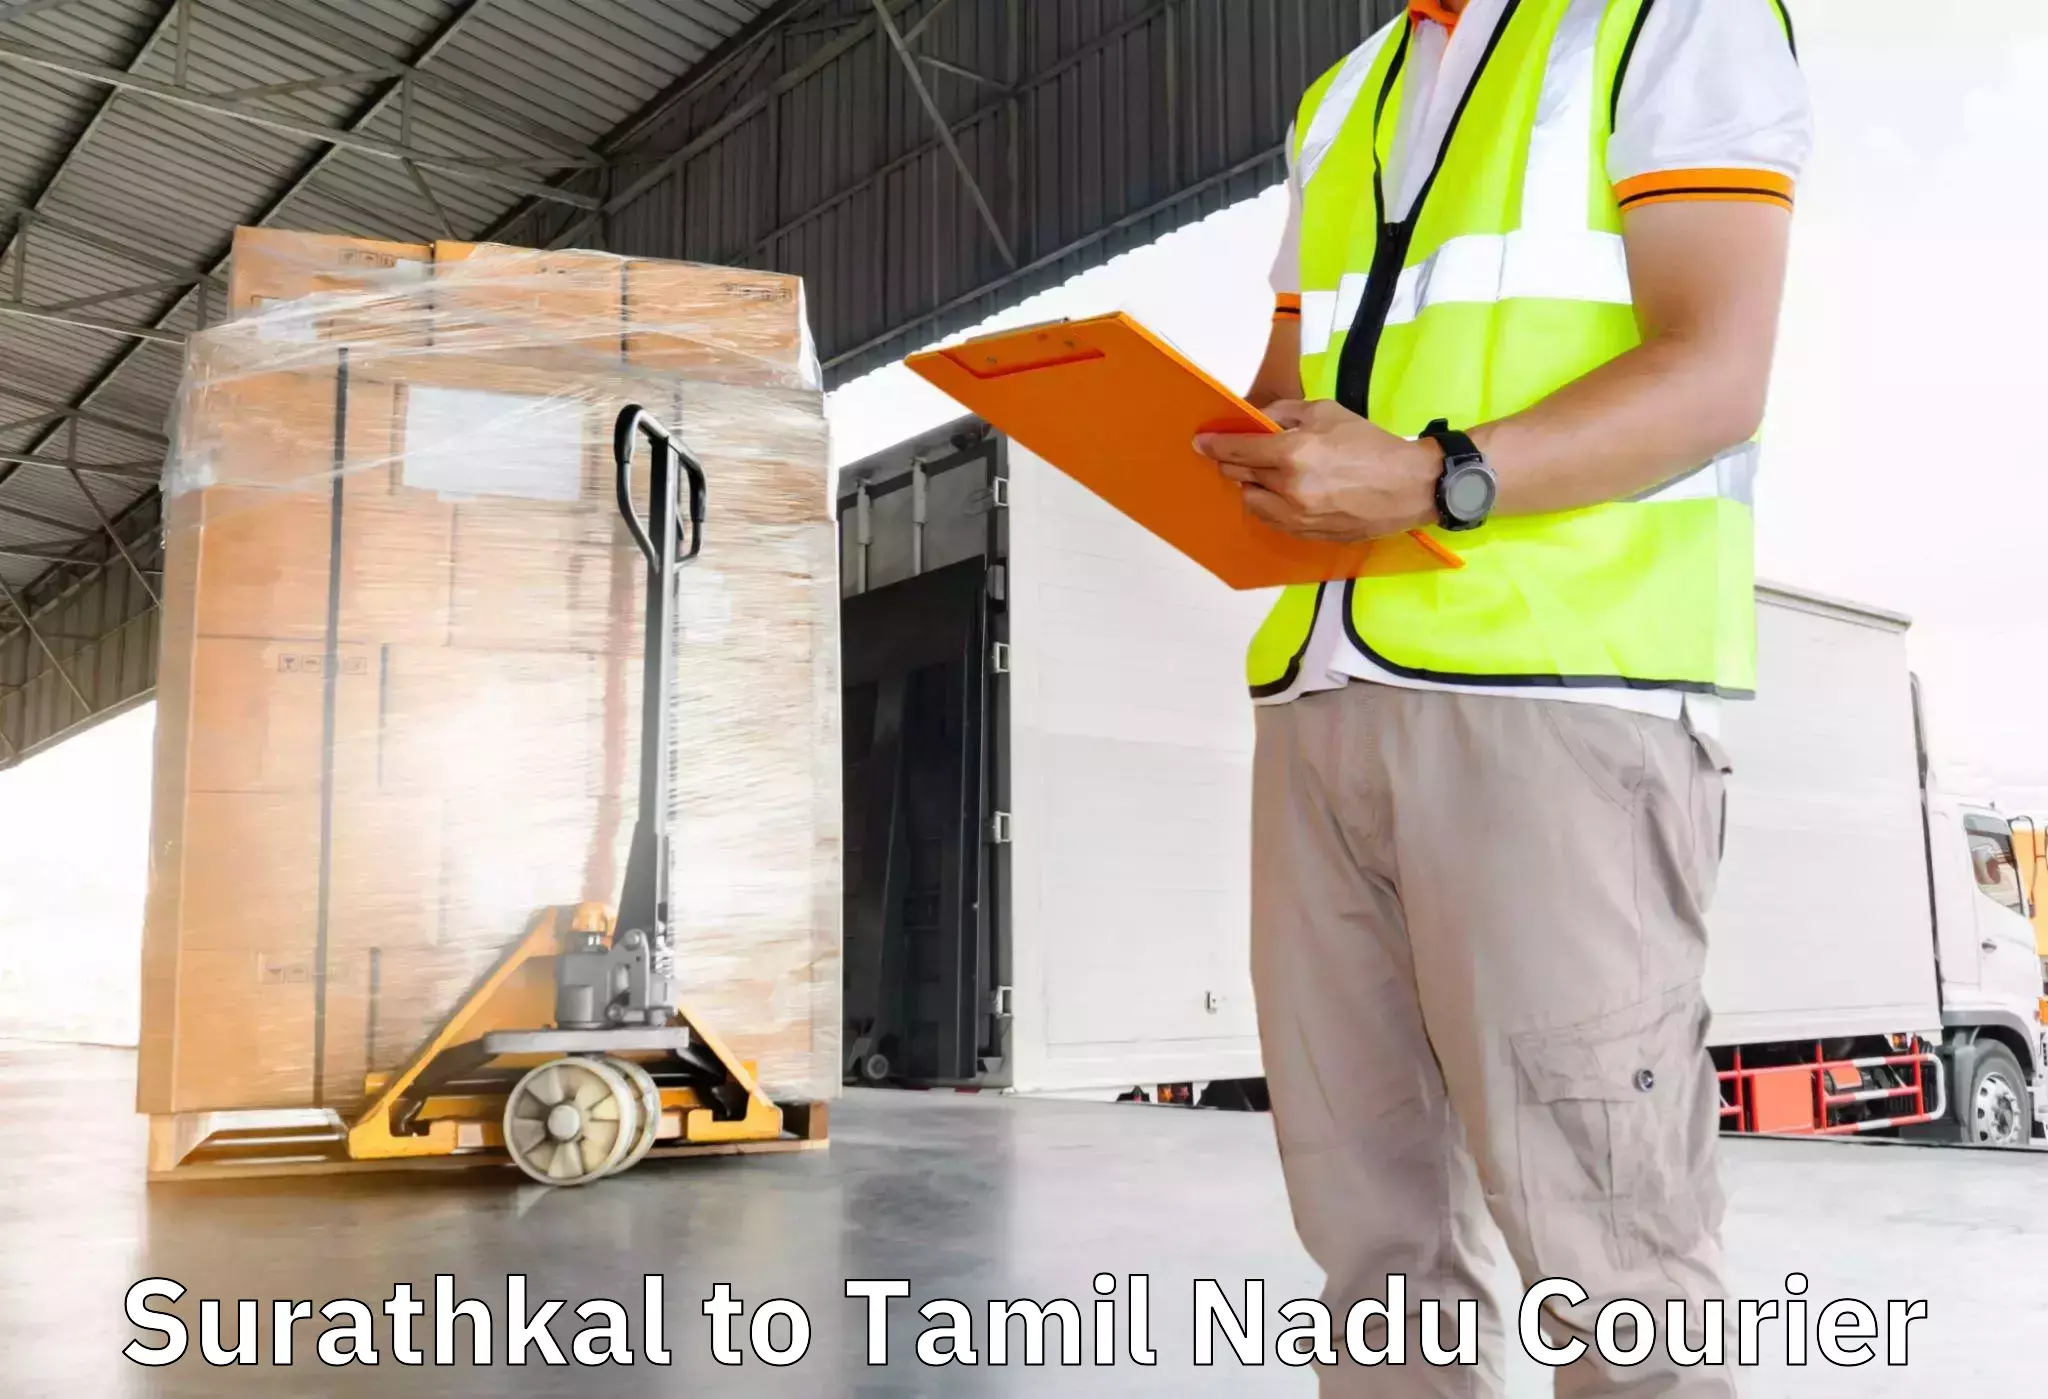 Household goods transport service Surathkal to Chennai Port